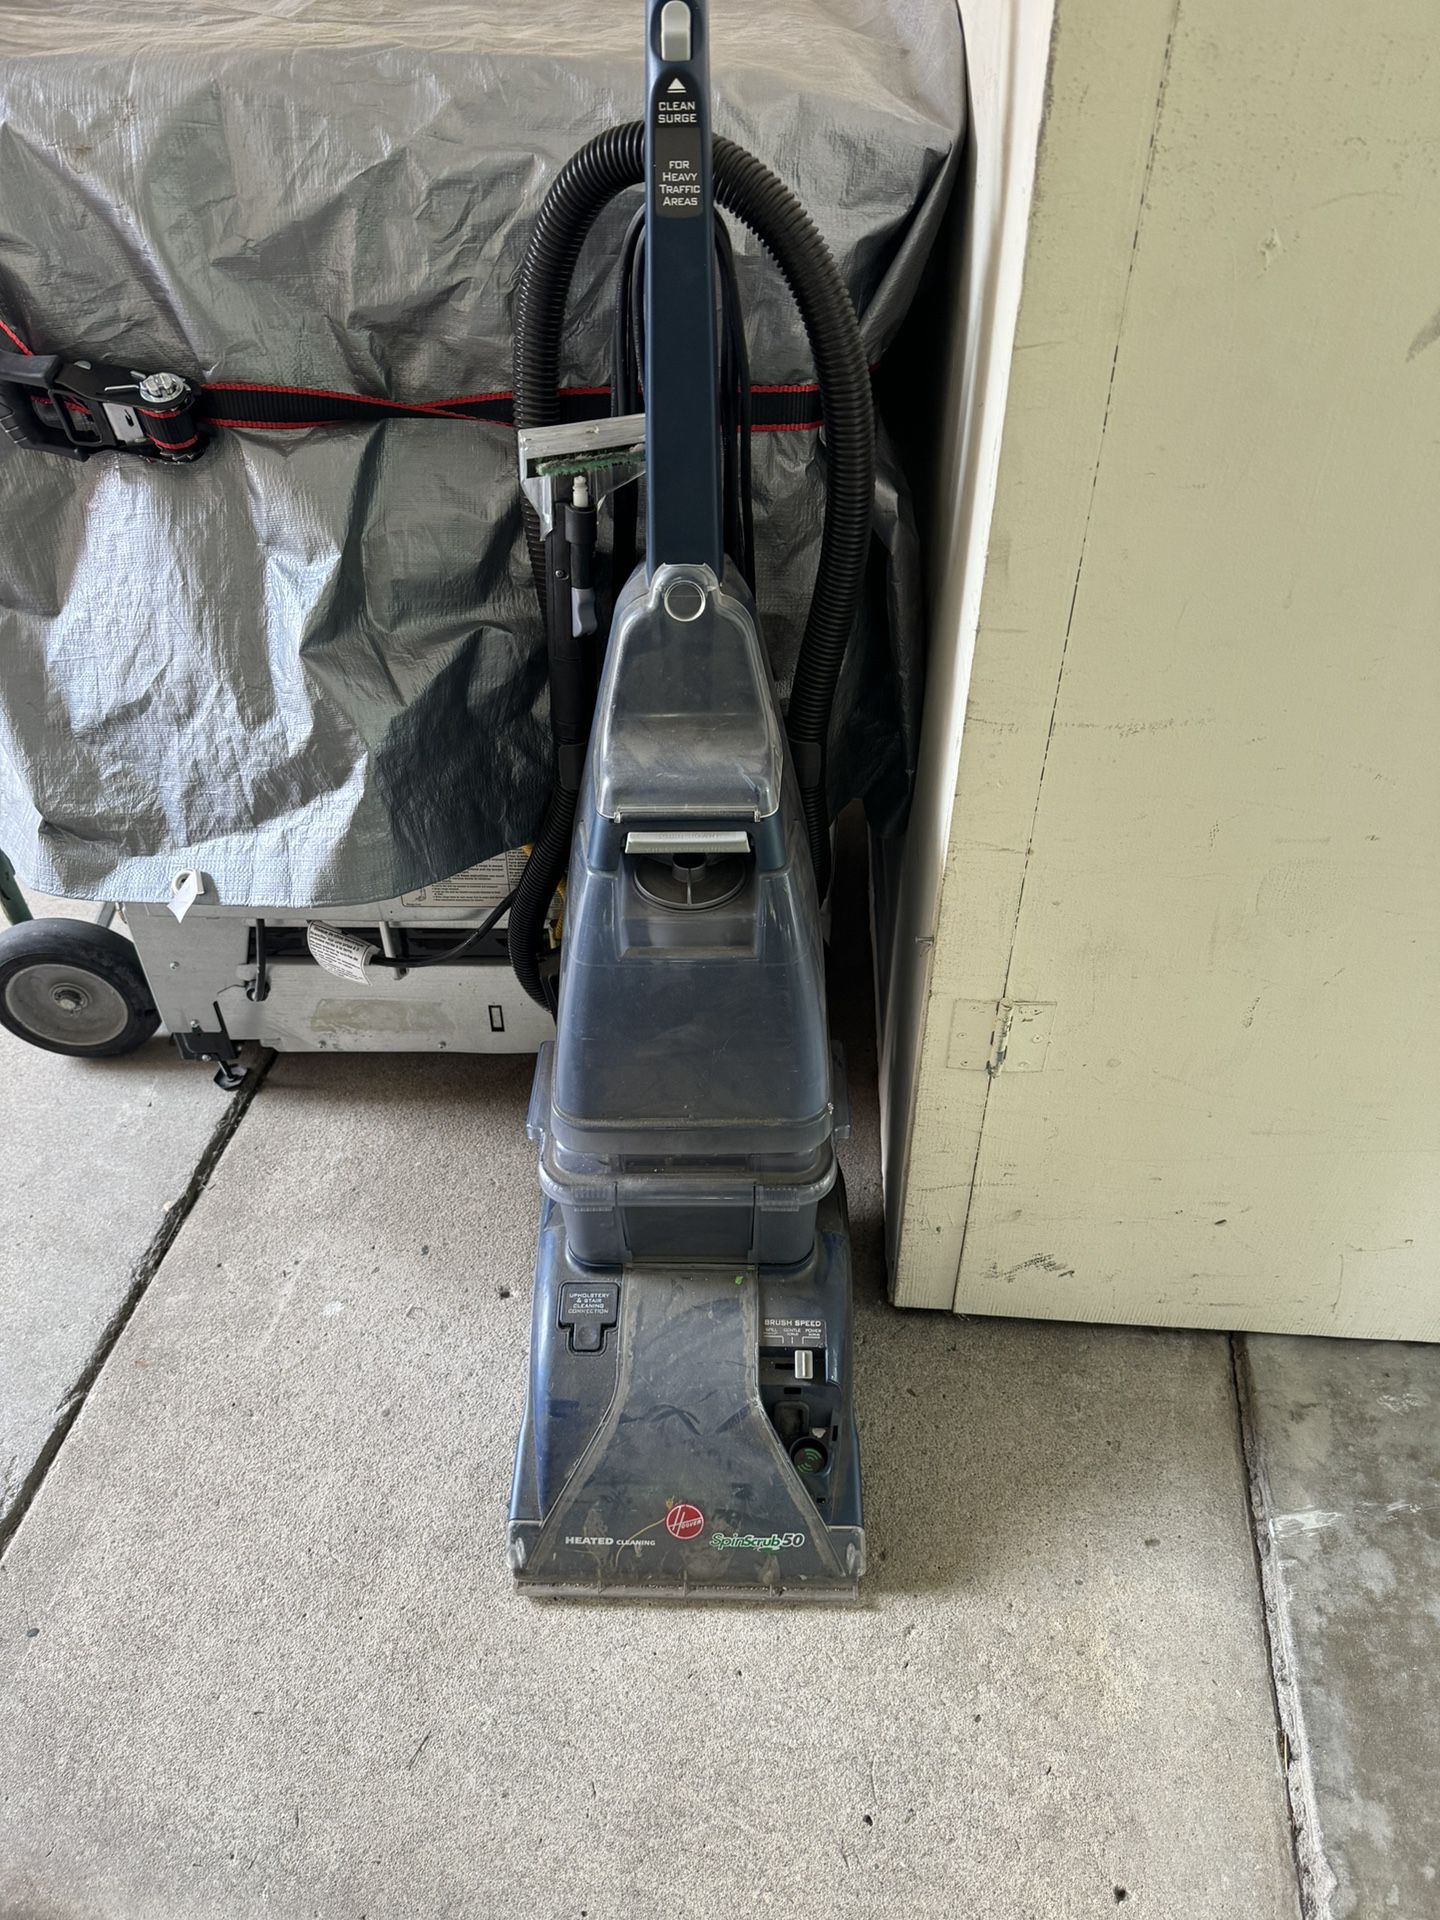 hoover heated cleaning vaccum